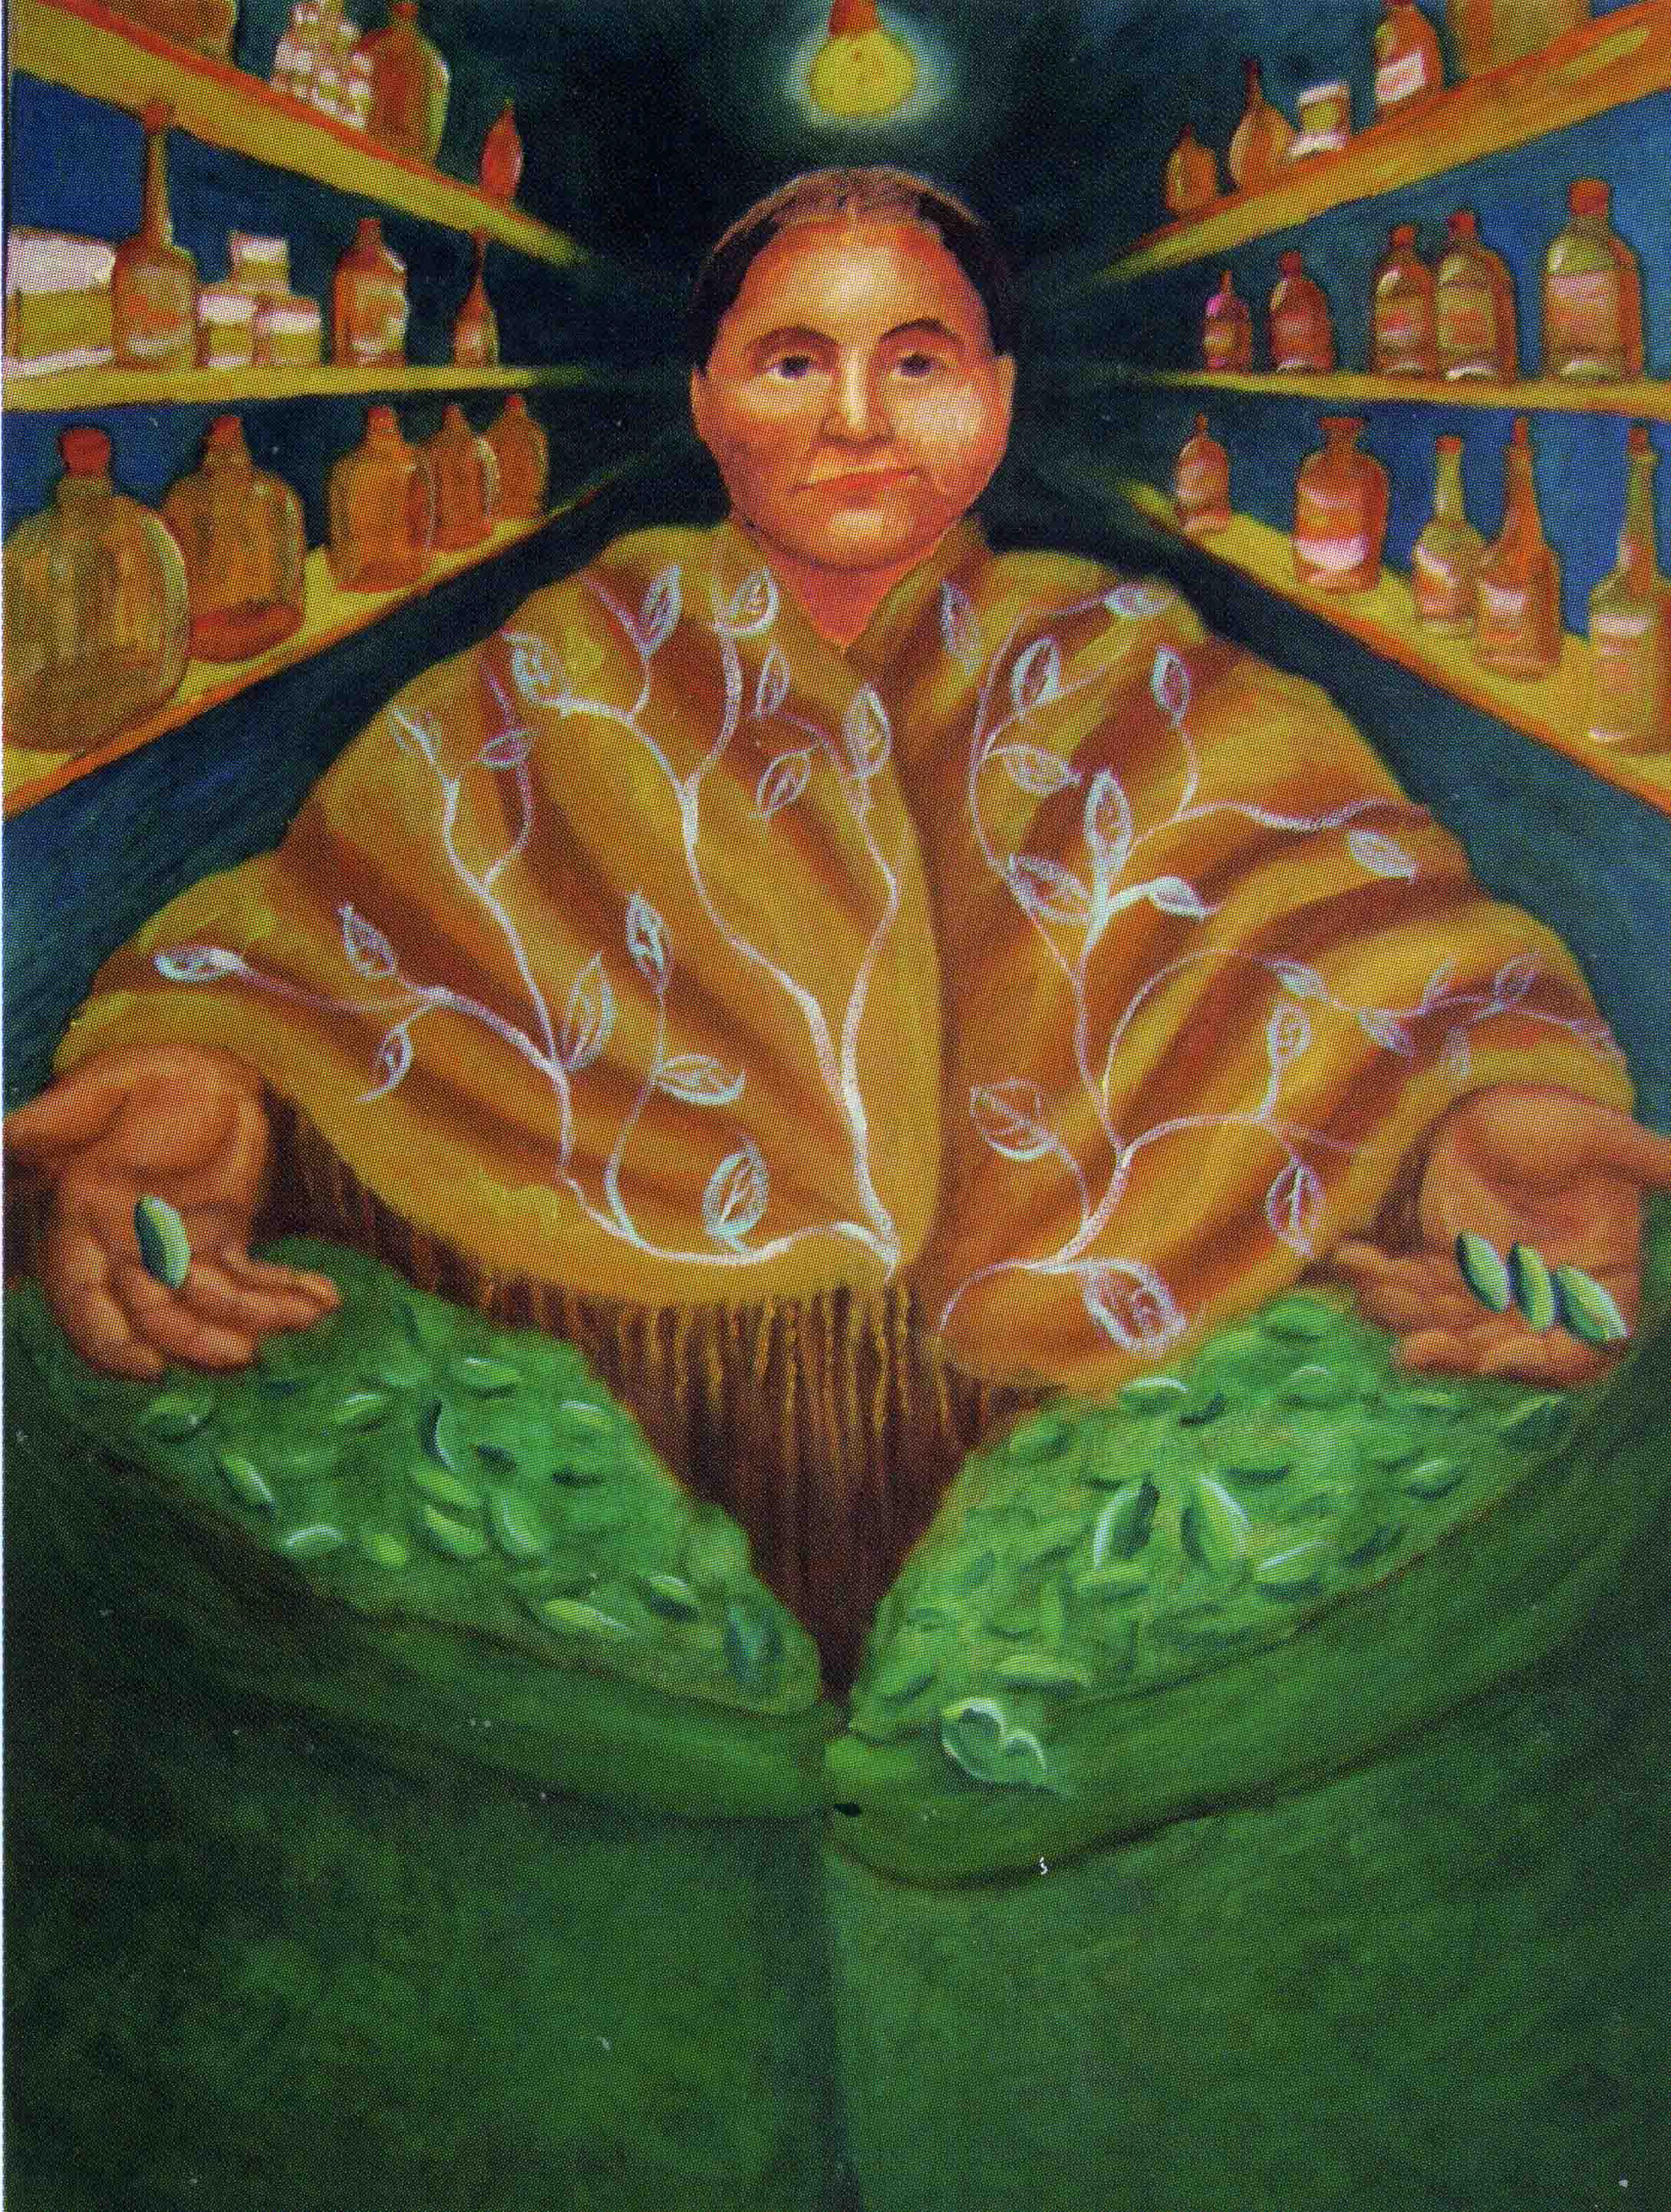 Coca Vendor (oil
painting by Lynette Yetter)